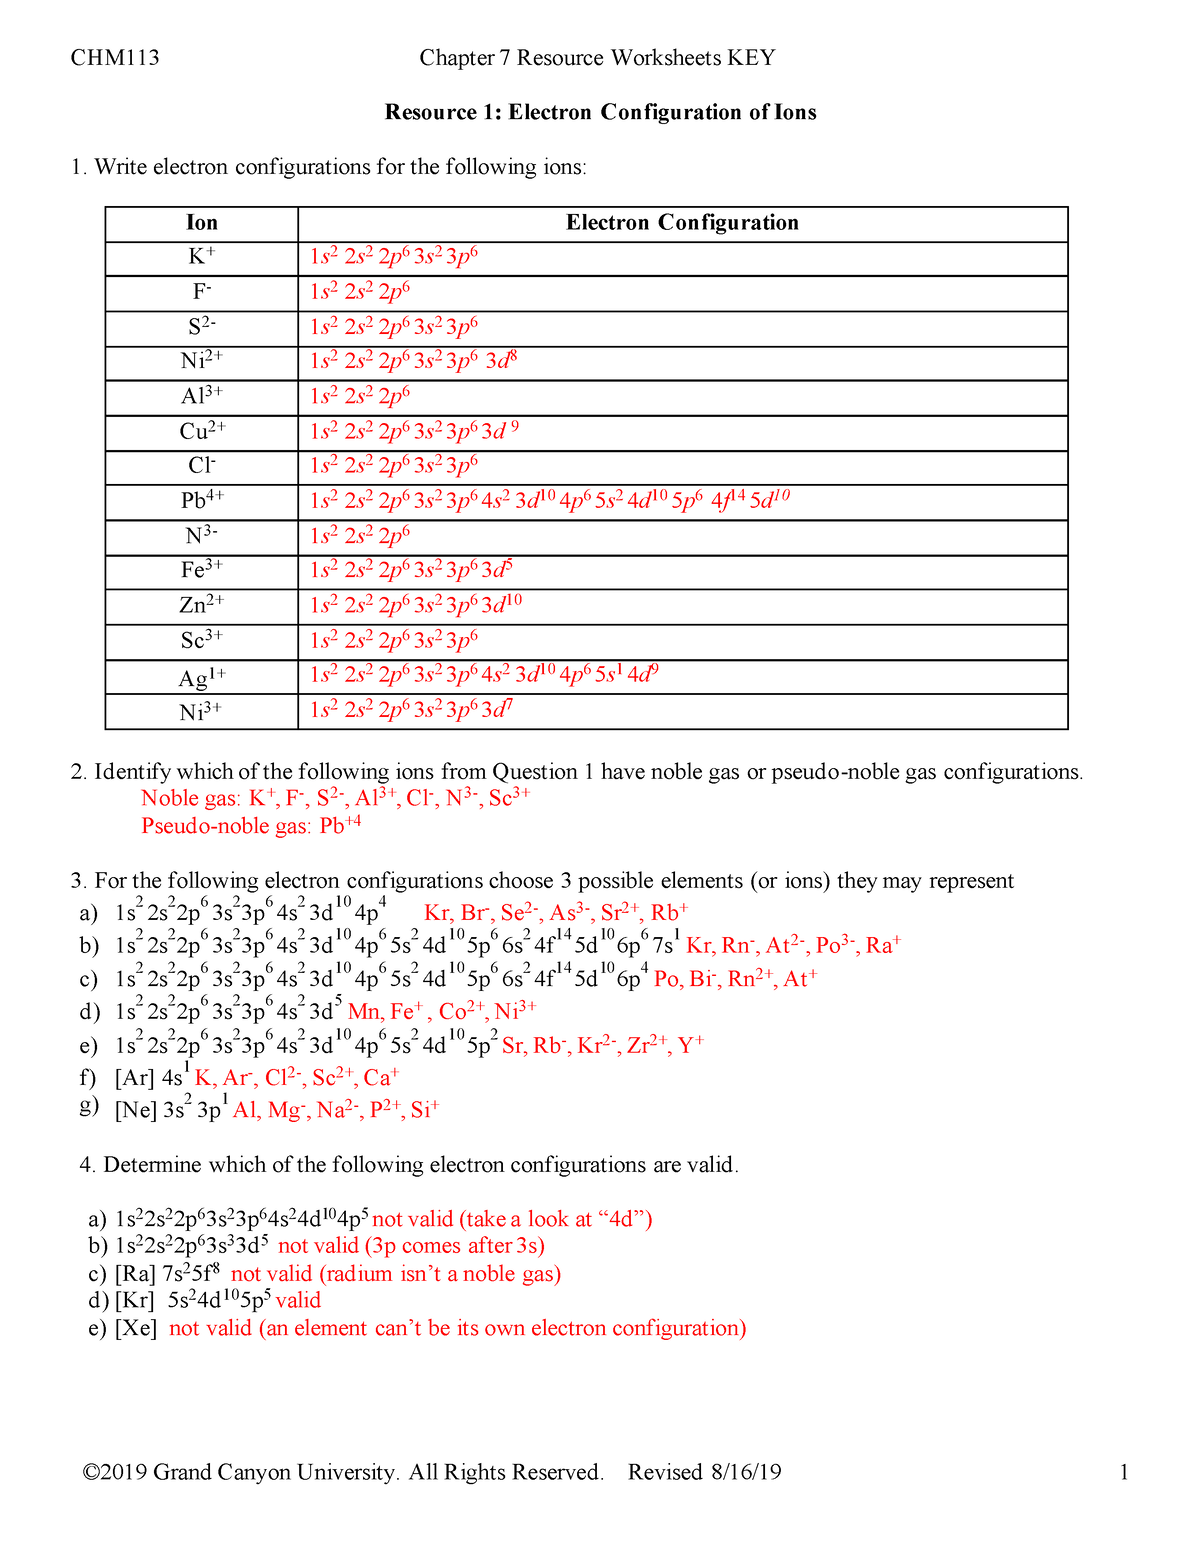 CHM113 T4 Ch7 Worksheets KEY Resource 1: Electron Configuration of